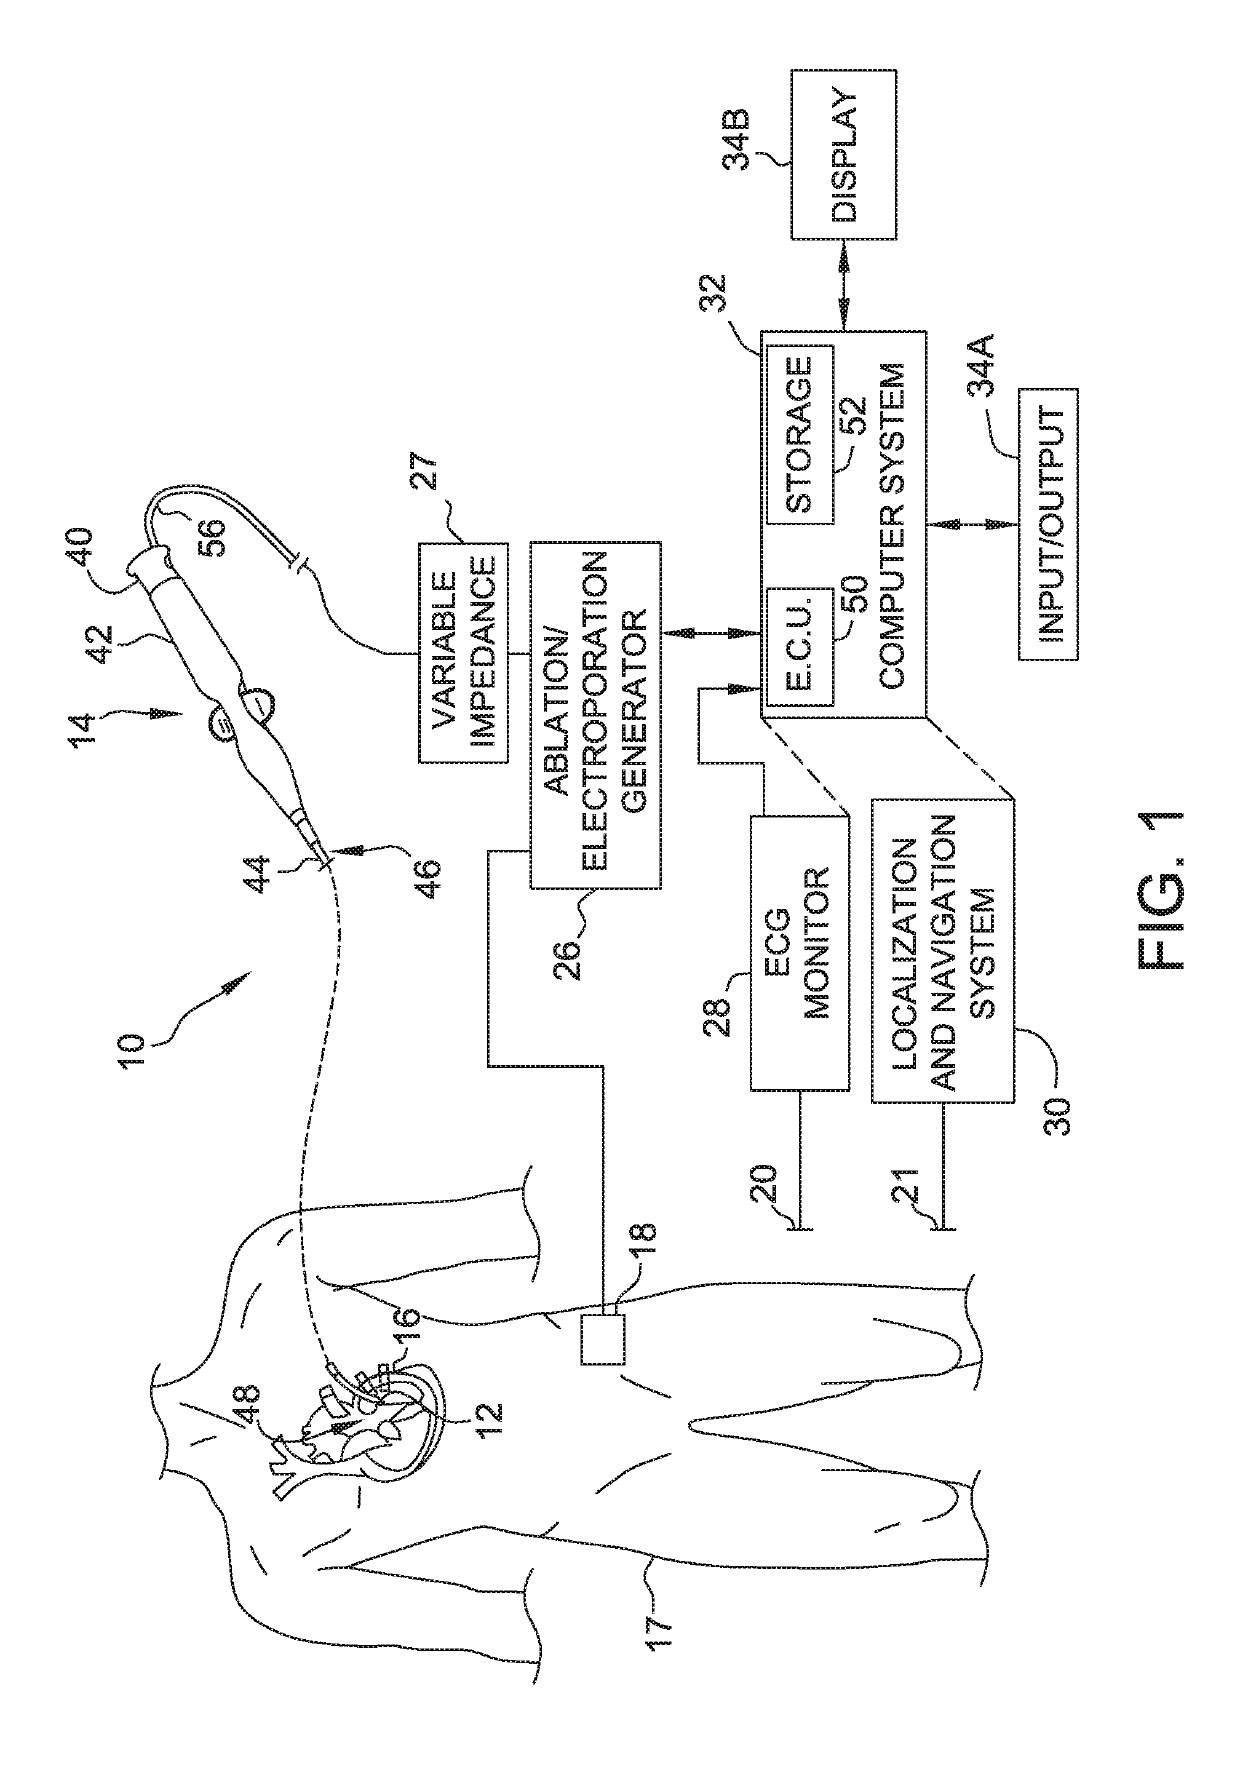 Electroporation systems and catheters for electroporation systems